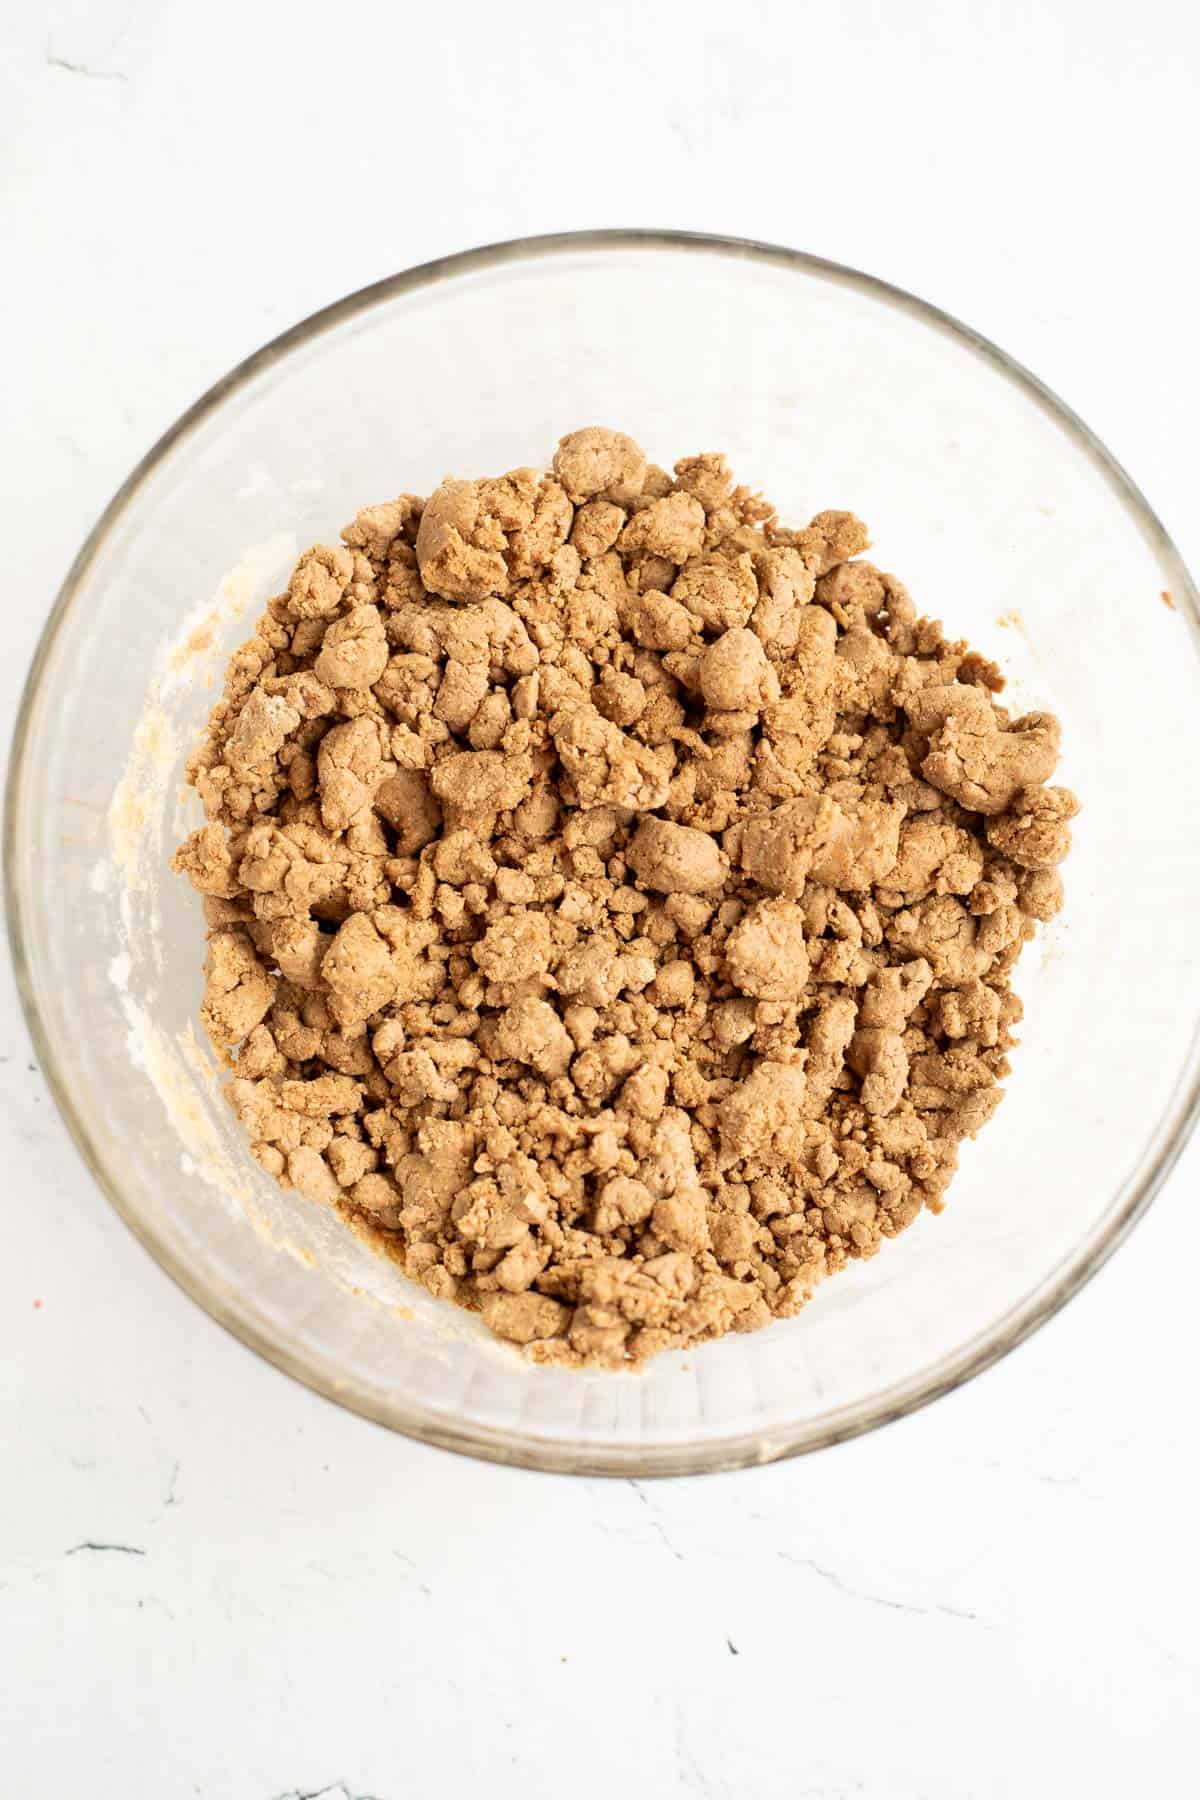 crumbly protein bar mixture in a glass bowl.